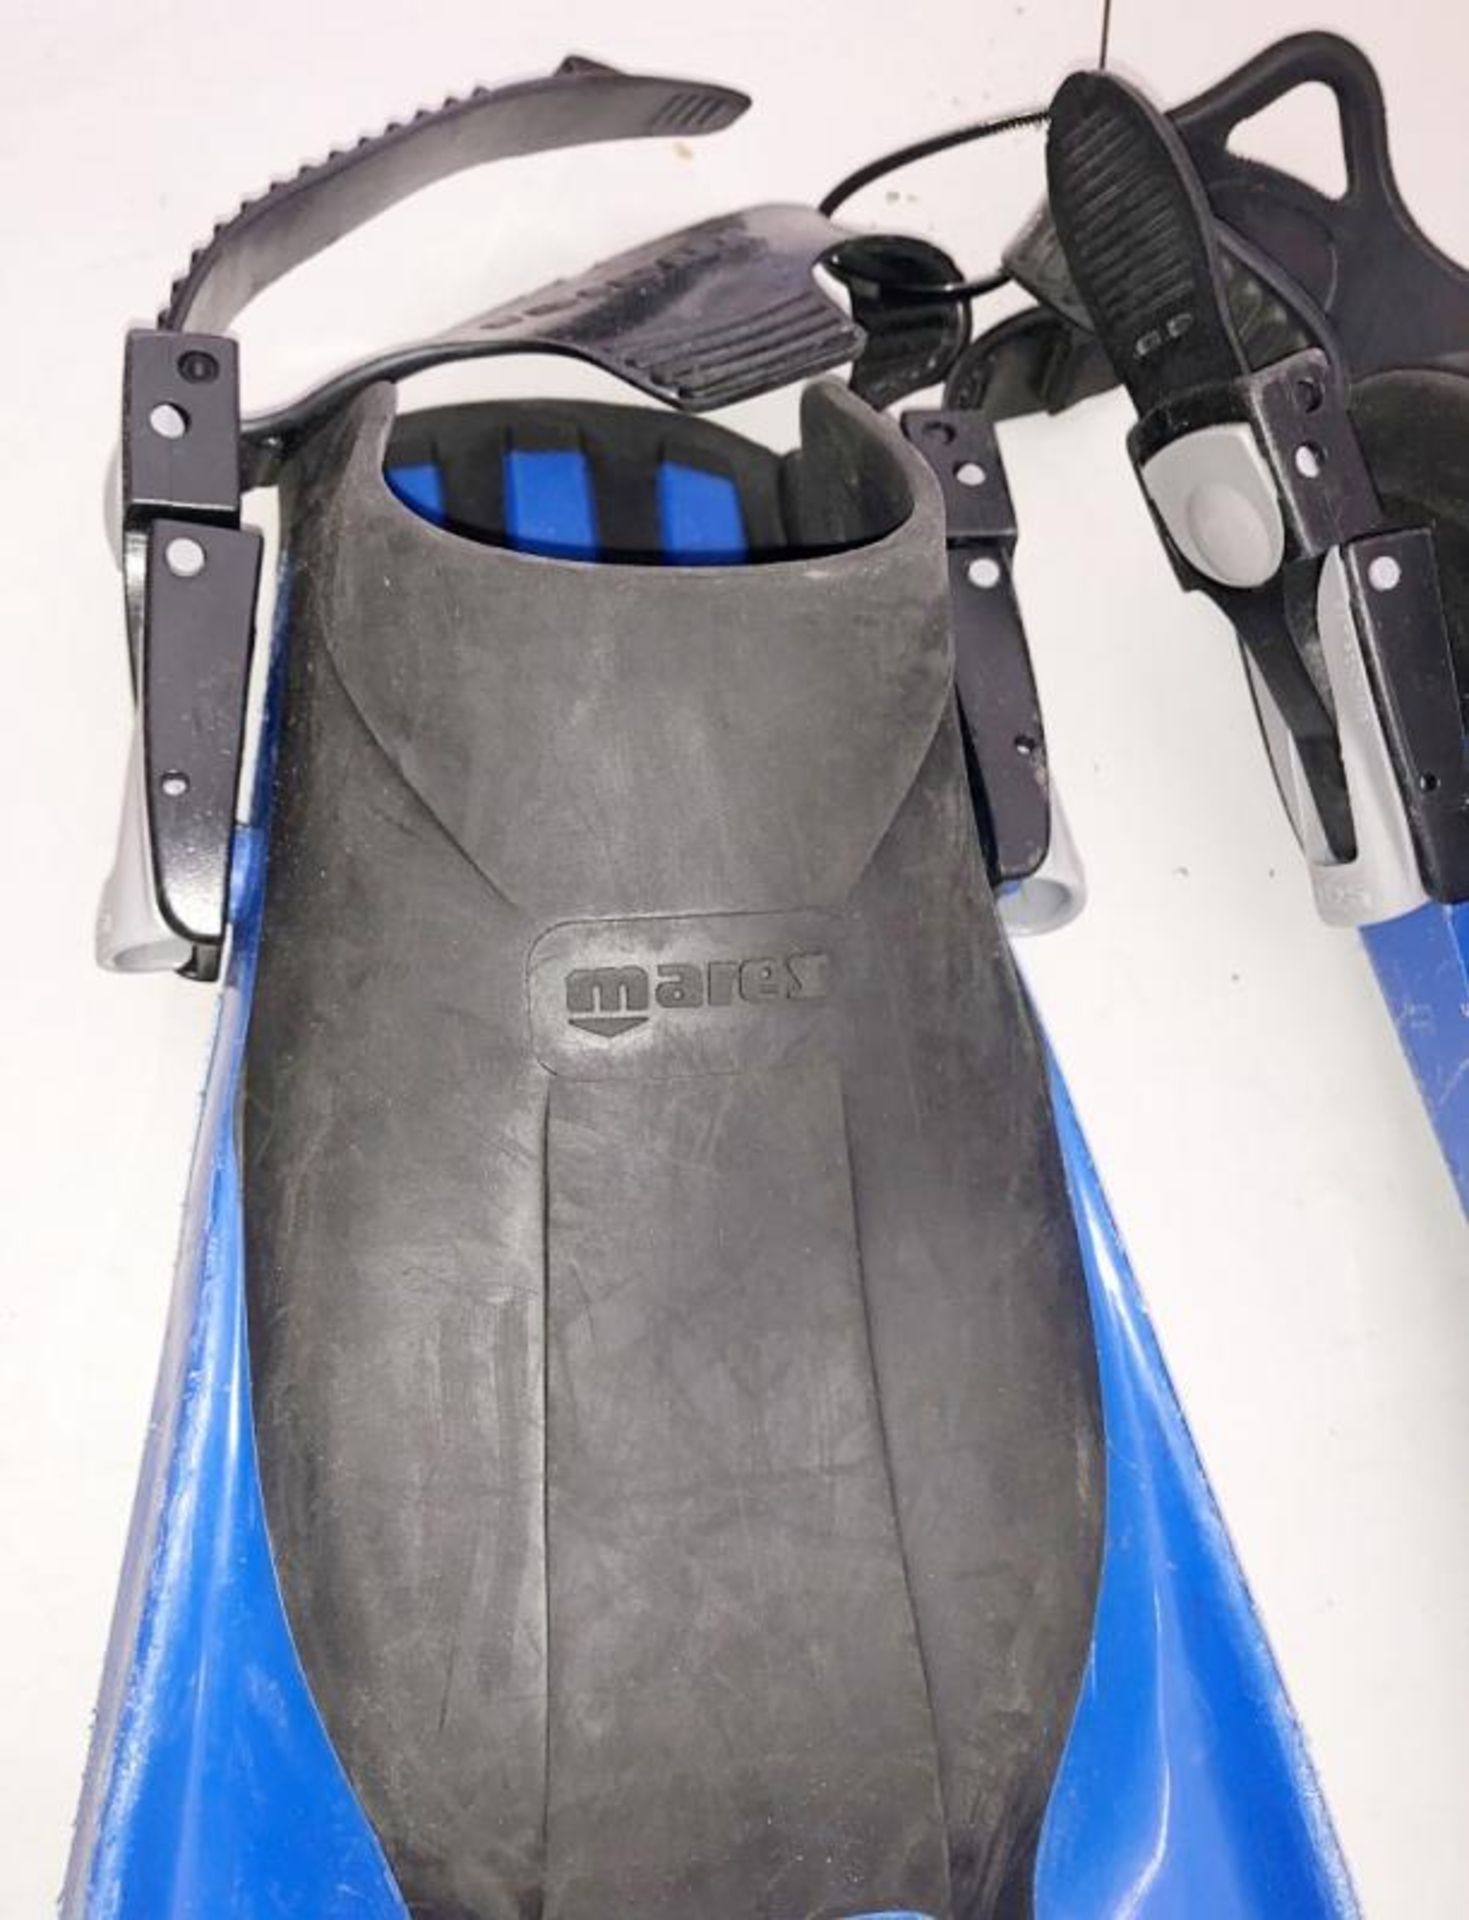 5 x Pairs Of Branded Diving Fins - Ref: NS175, NS176, NS177, NS178, NS179, NS180, NS181, NS182, NS18 - Image 9 of 17